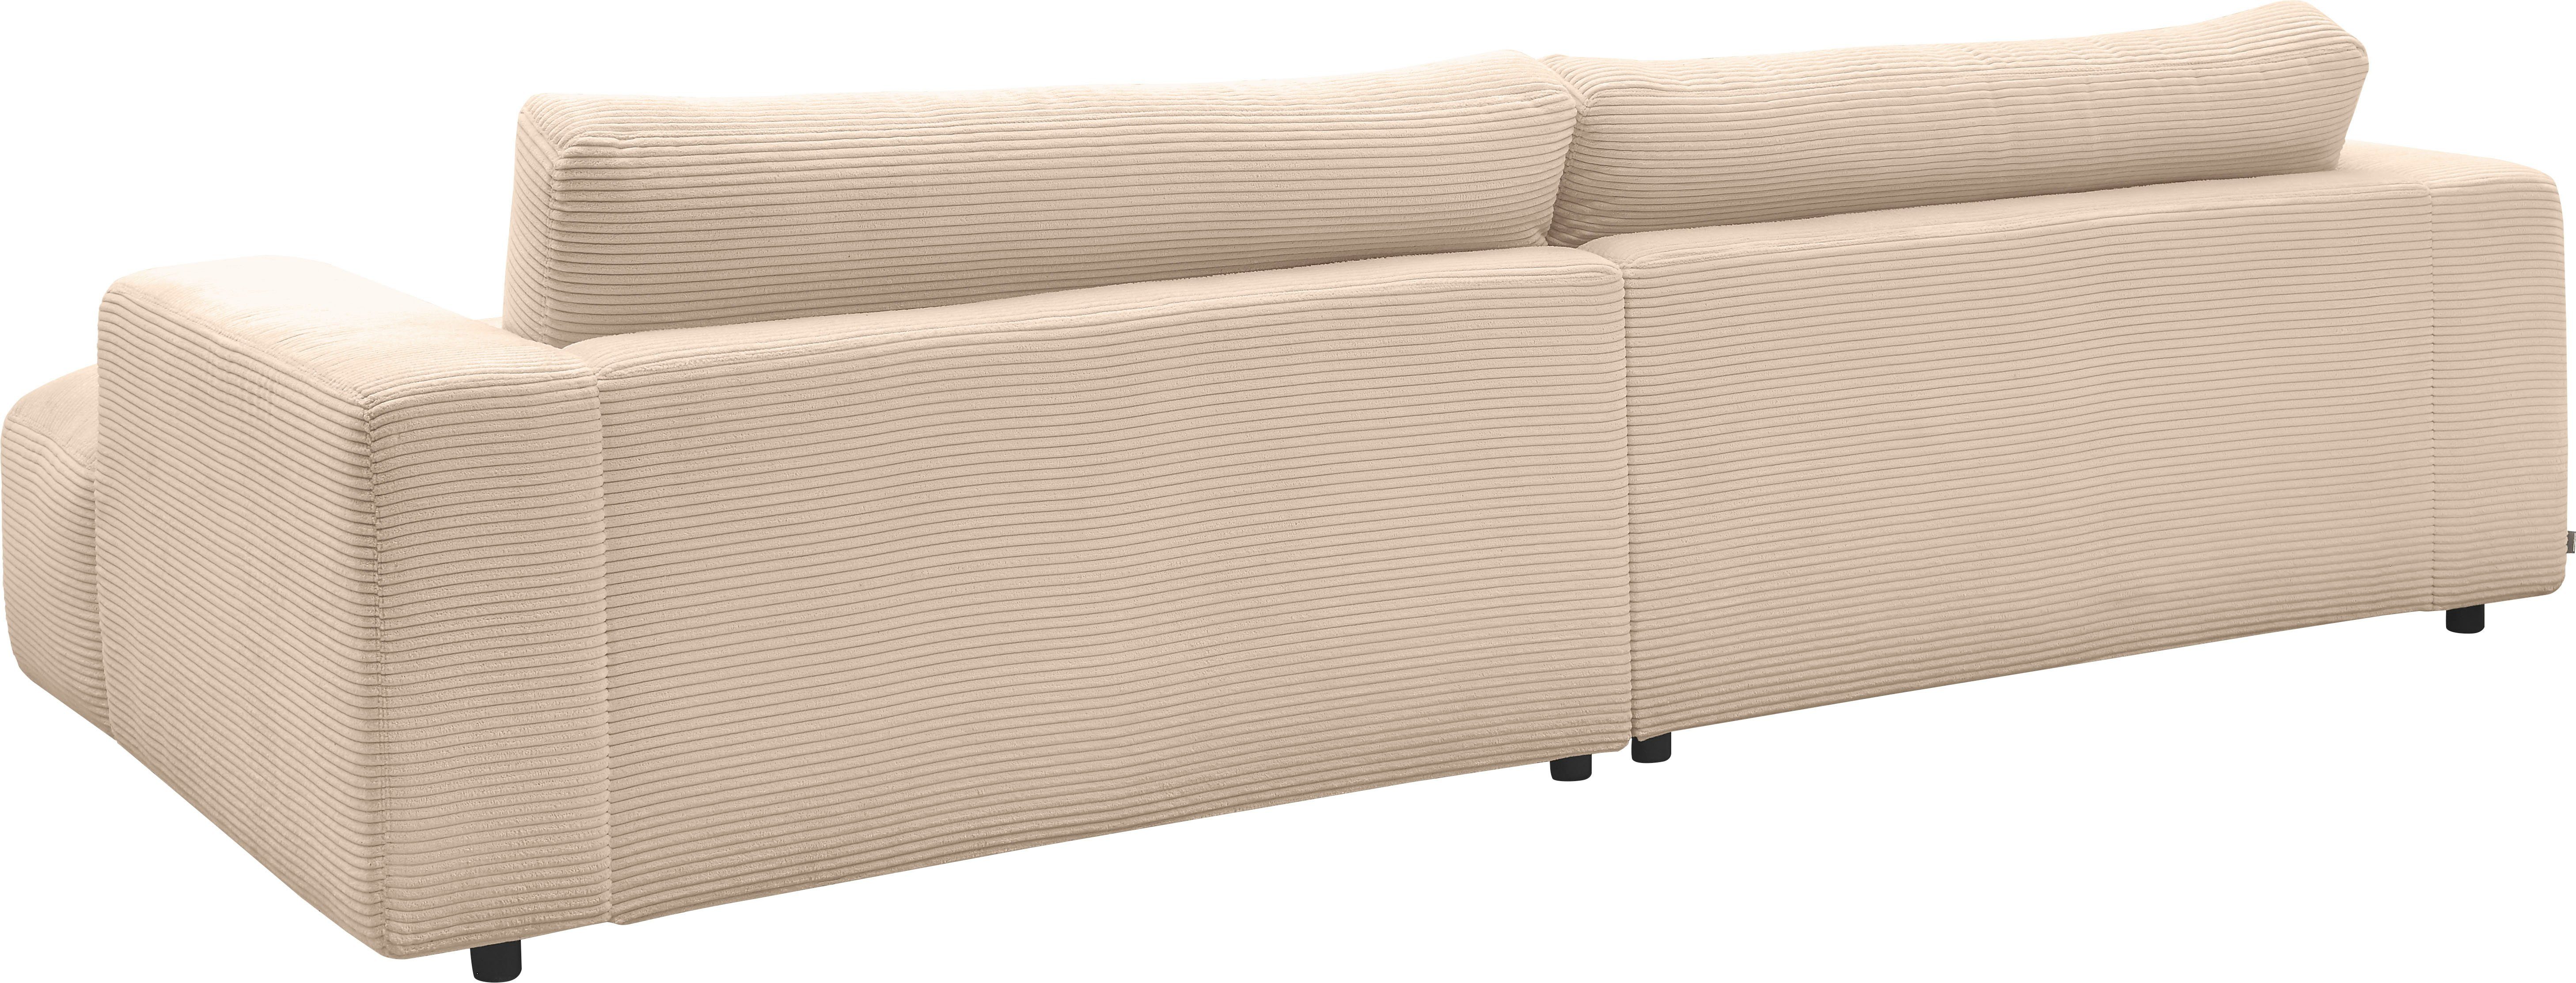 GALLERY M branded cm Musterring 292 by nature Lucia, Cord-Bezug, Loungesofa Breite